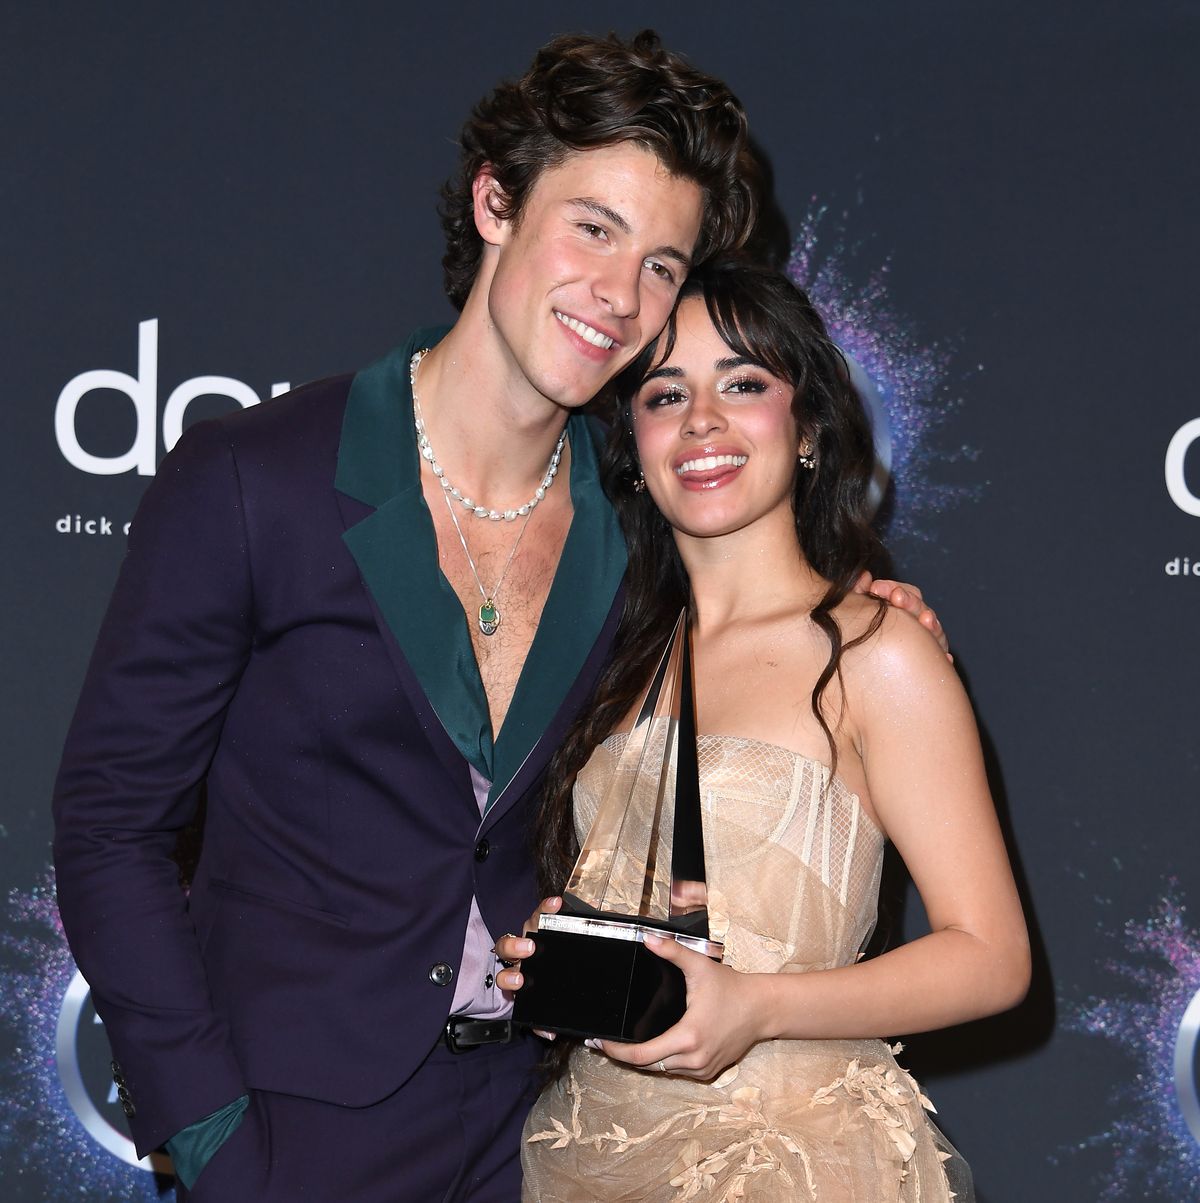 Camila Cabello And Shawn Mendes' Full Relationship History